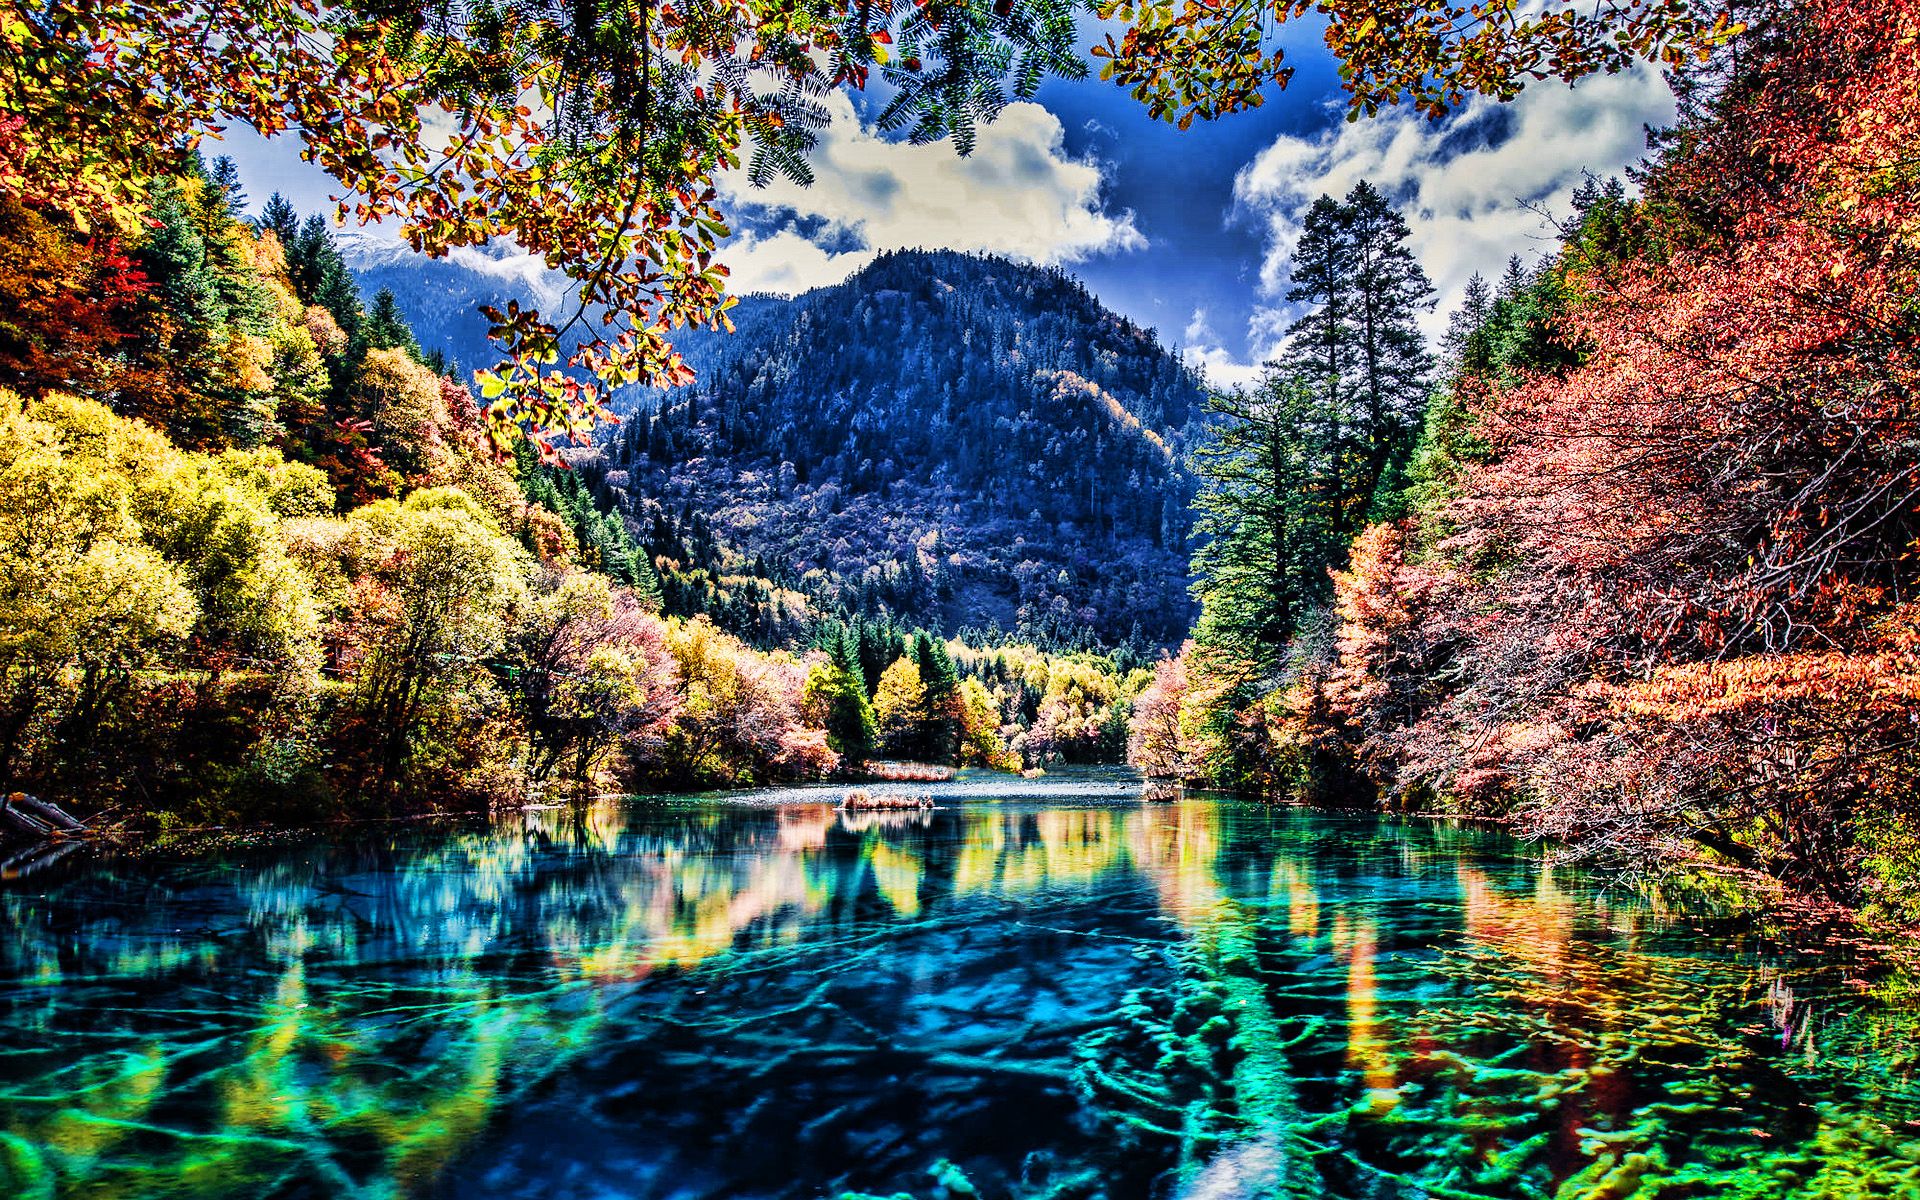 Download wallpaper Jiuzhaigou National Park, HDR, blue lake, forest, China, beautiful nature, autumn, Asia, Valley of Nine Villages, Chinese landmarks for desktop with resolution 1920x1200. High Quality HD picture wallpaper